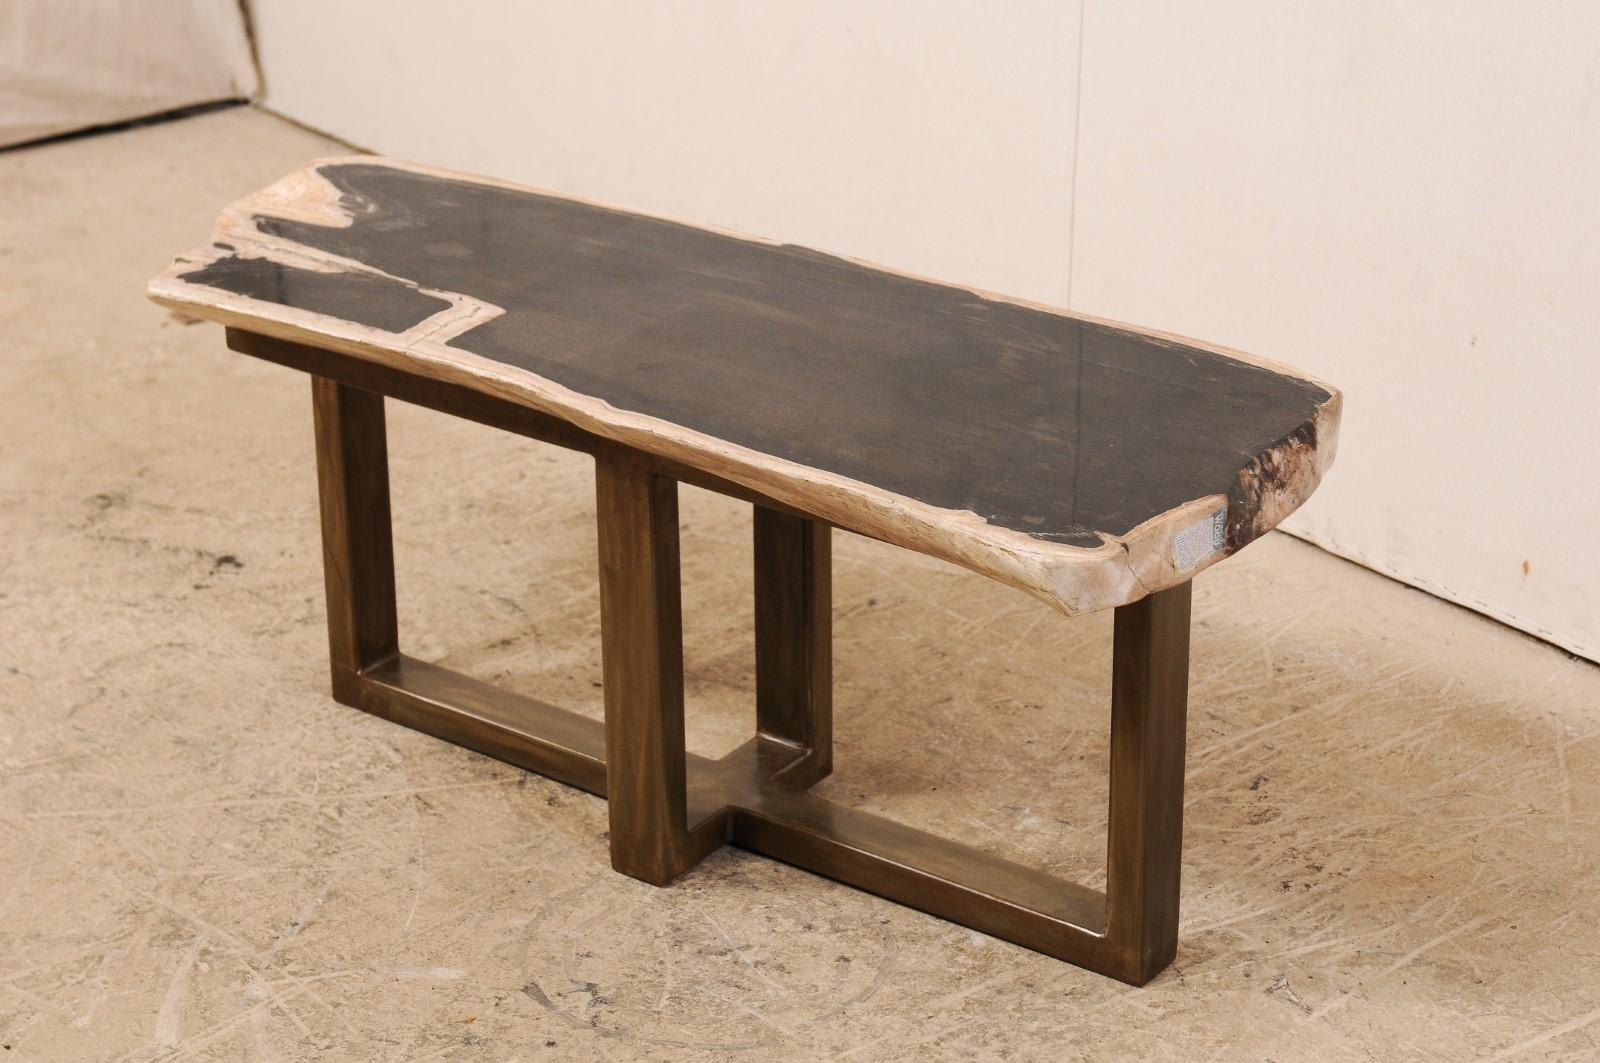 Petrified Wood Coffee Table or Bench with Sleek Modern Metal Base In Good Condition For Sale In Atlanta, GA